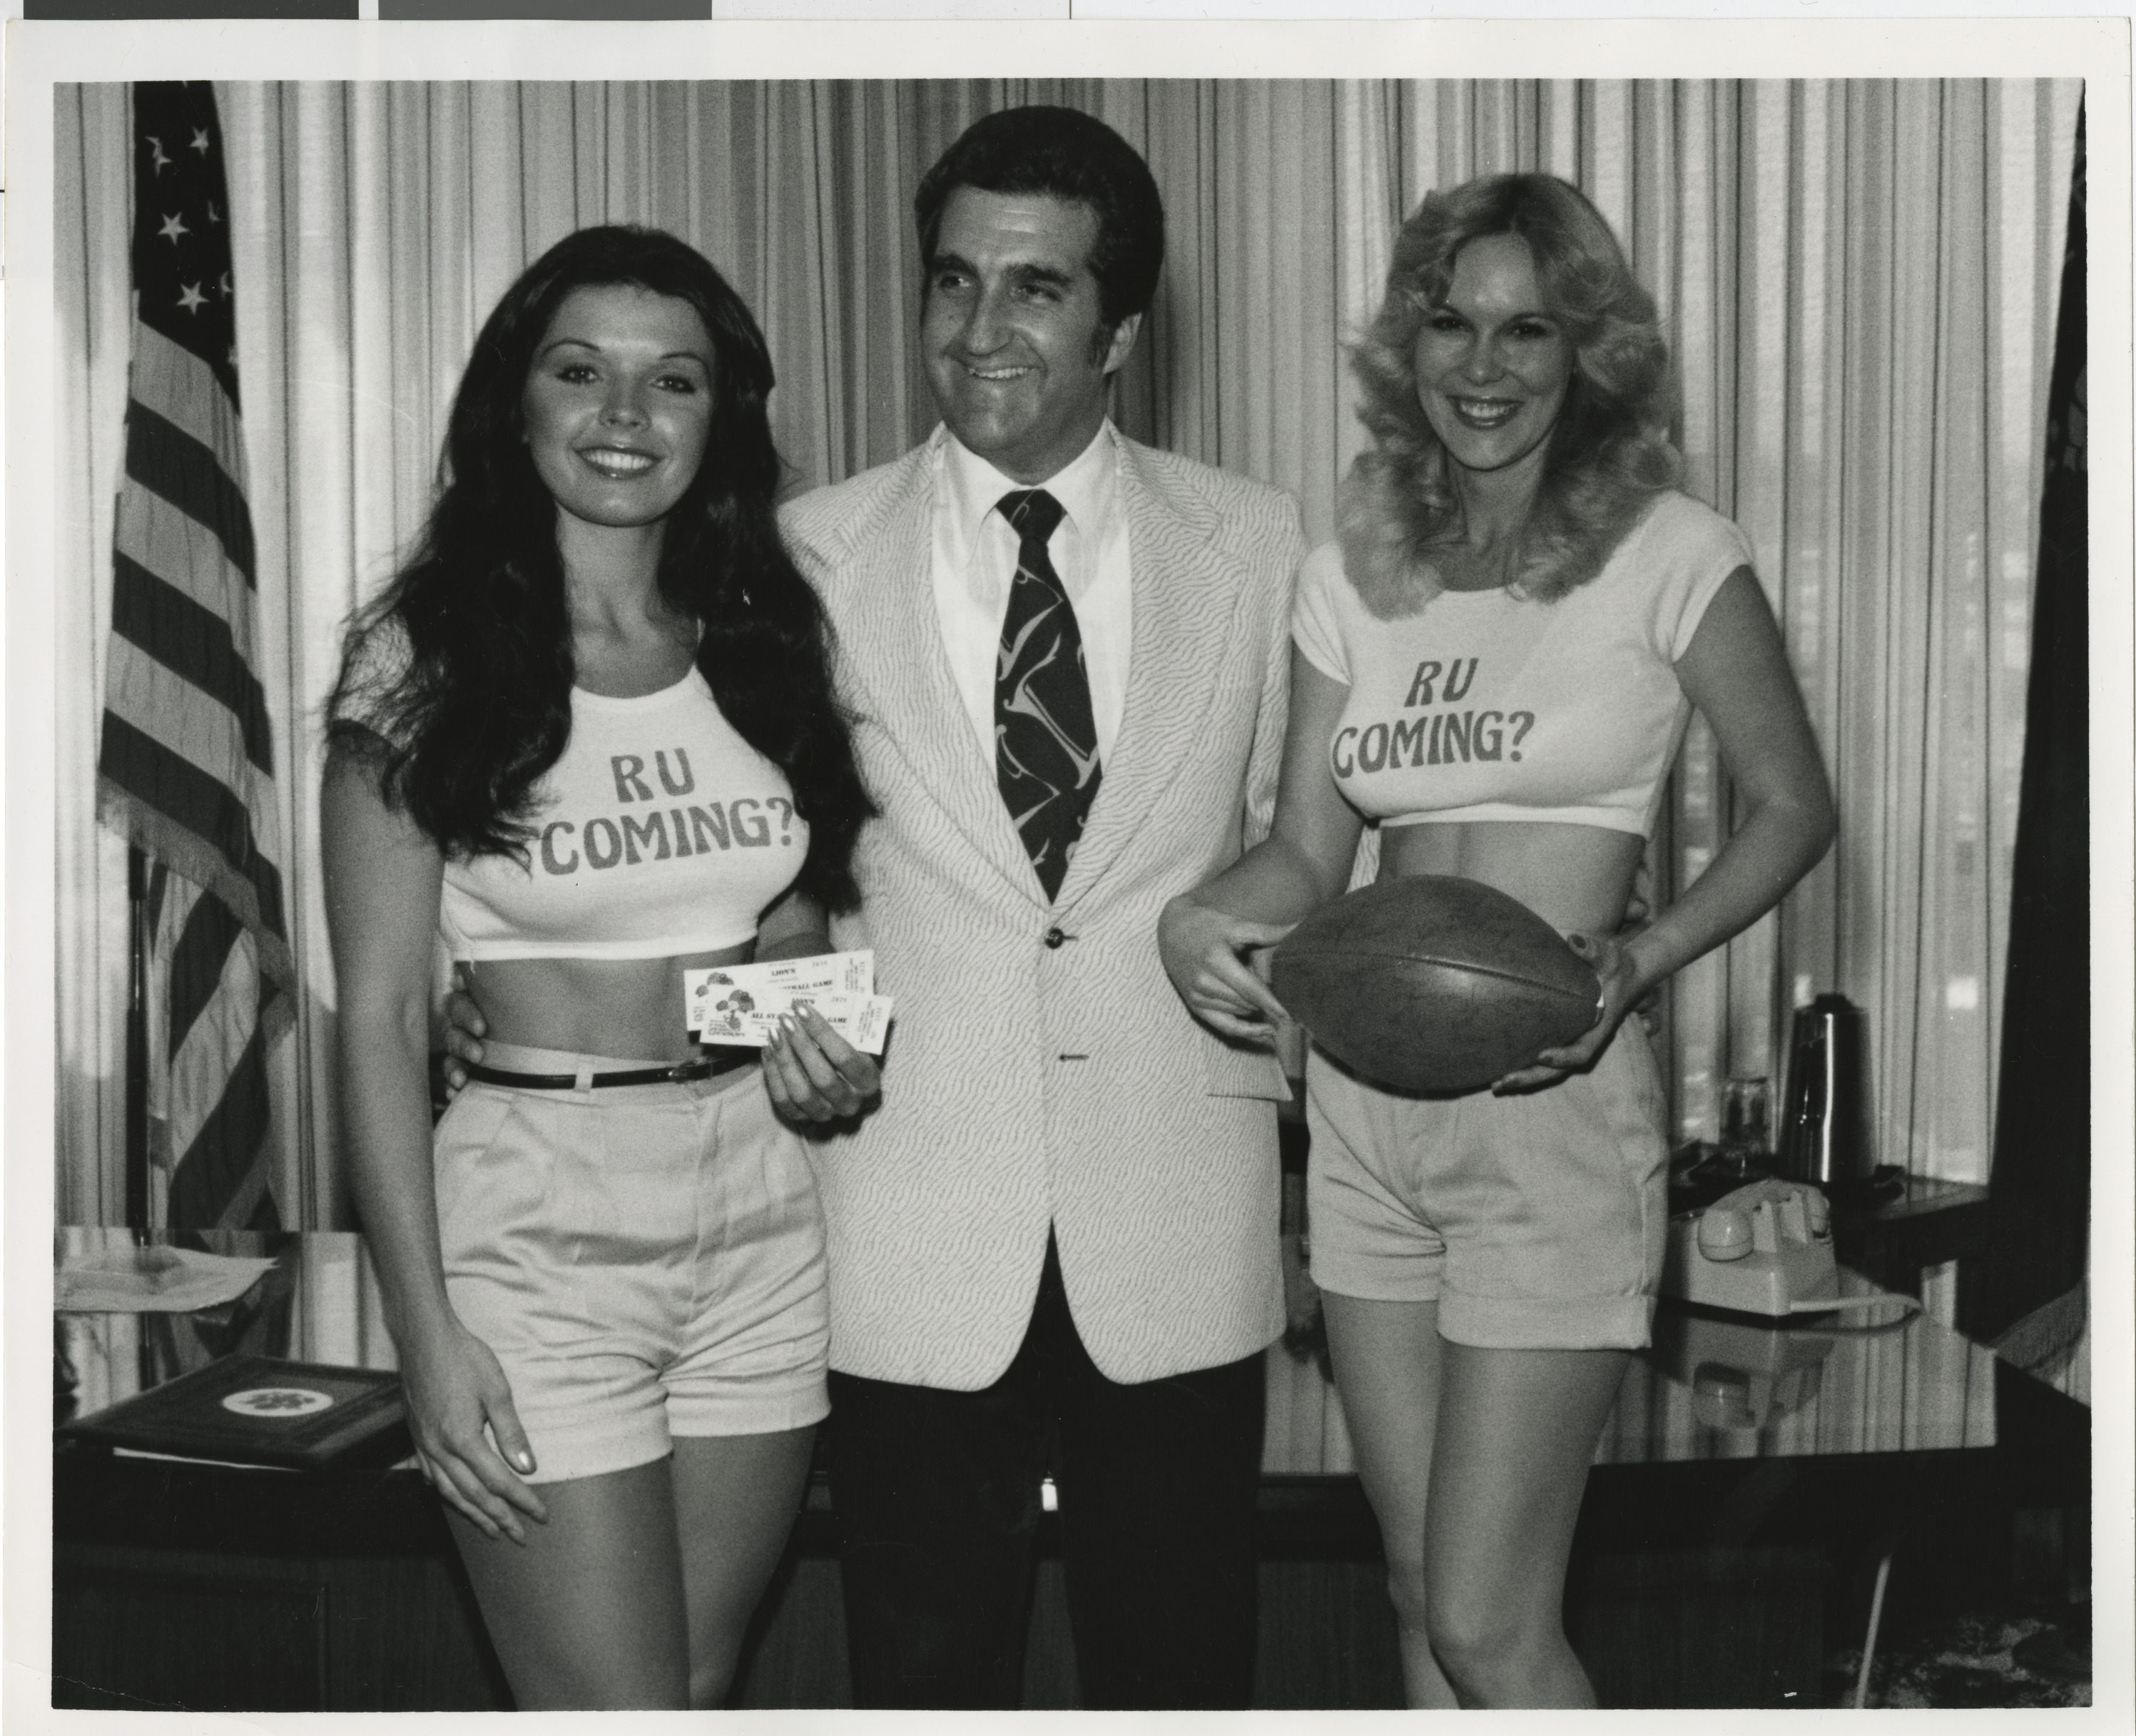 Photograph of Ron Lurie with two women in crop-tops